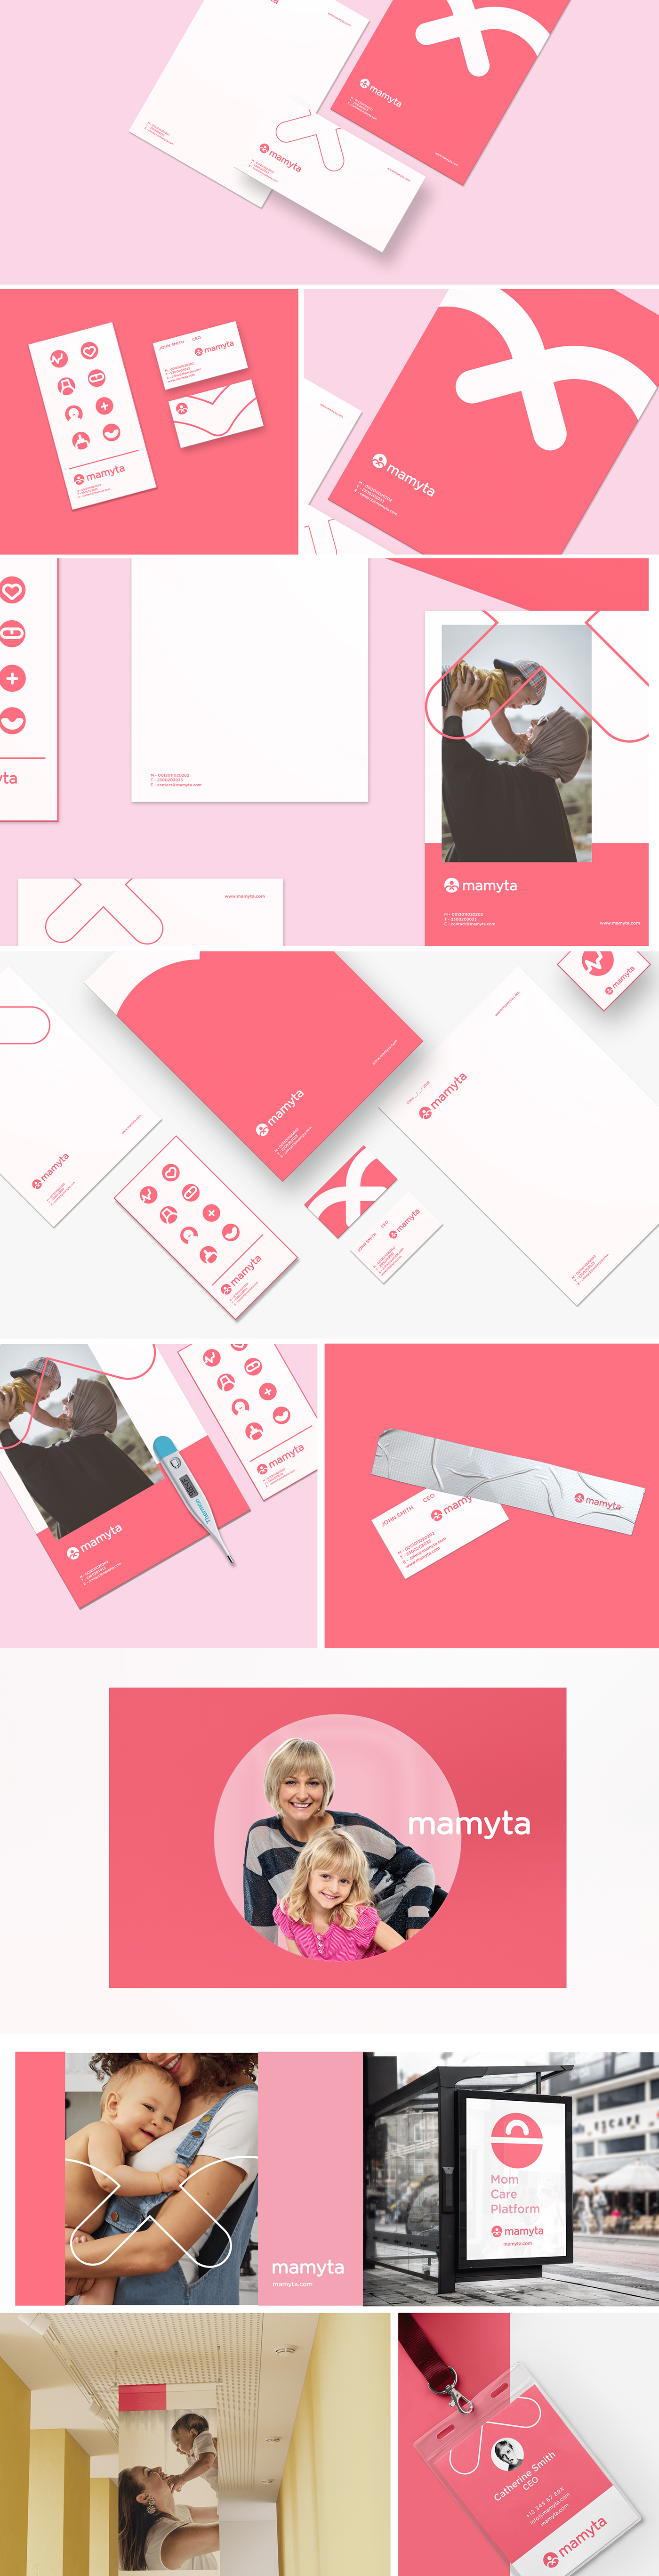 health care doctors Medical app consultations brand identity